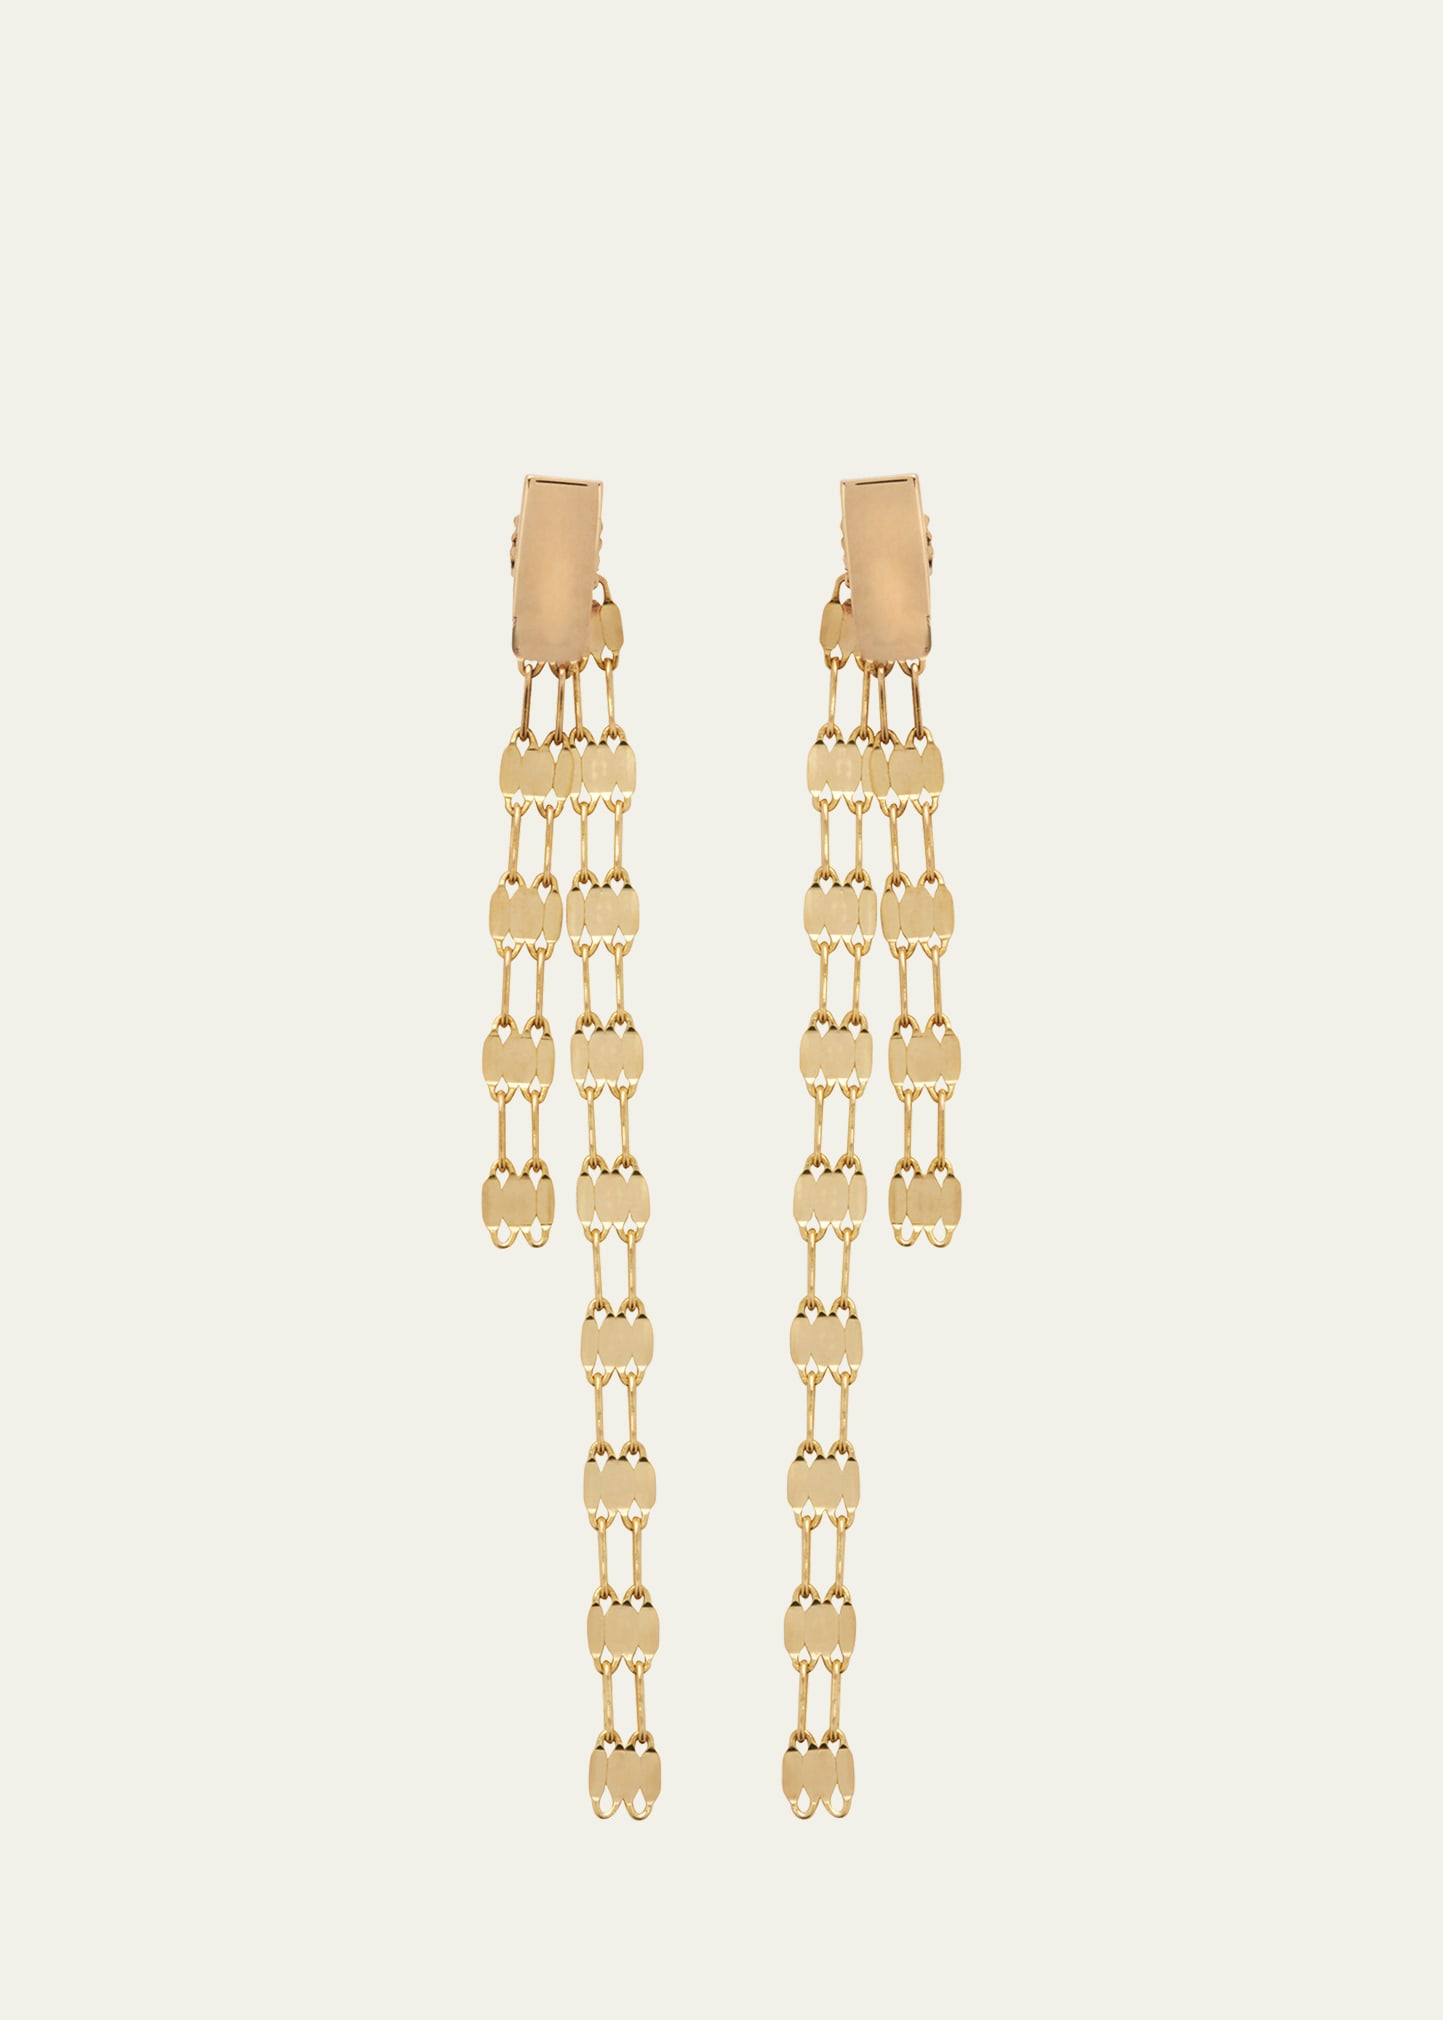 LANA ST BARTS LINEAR FRONT AND BACK EARRINGS